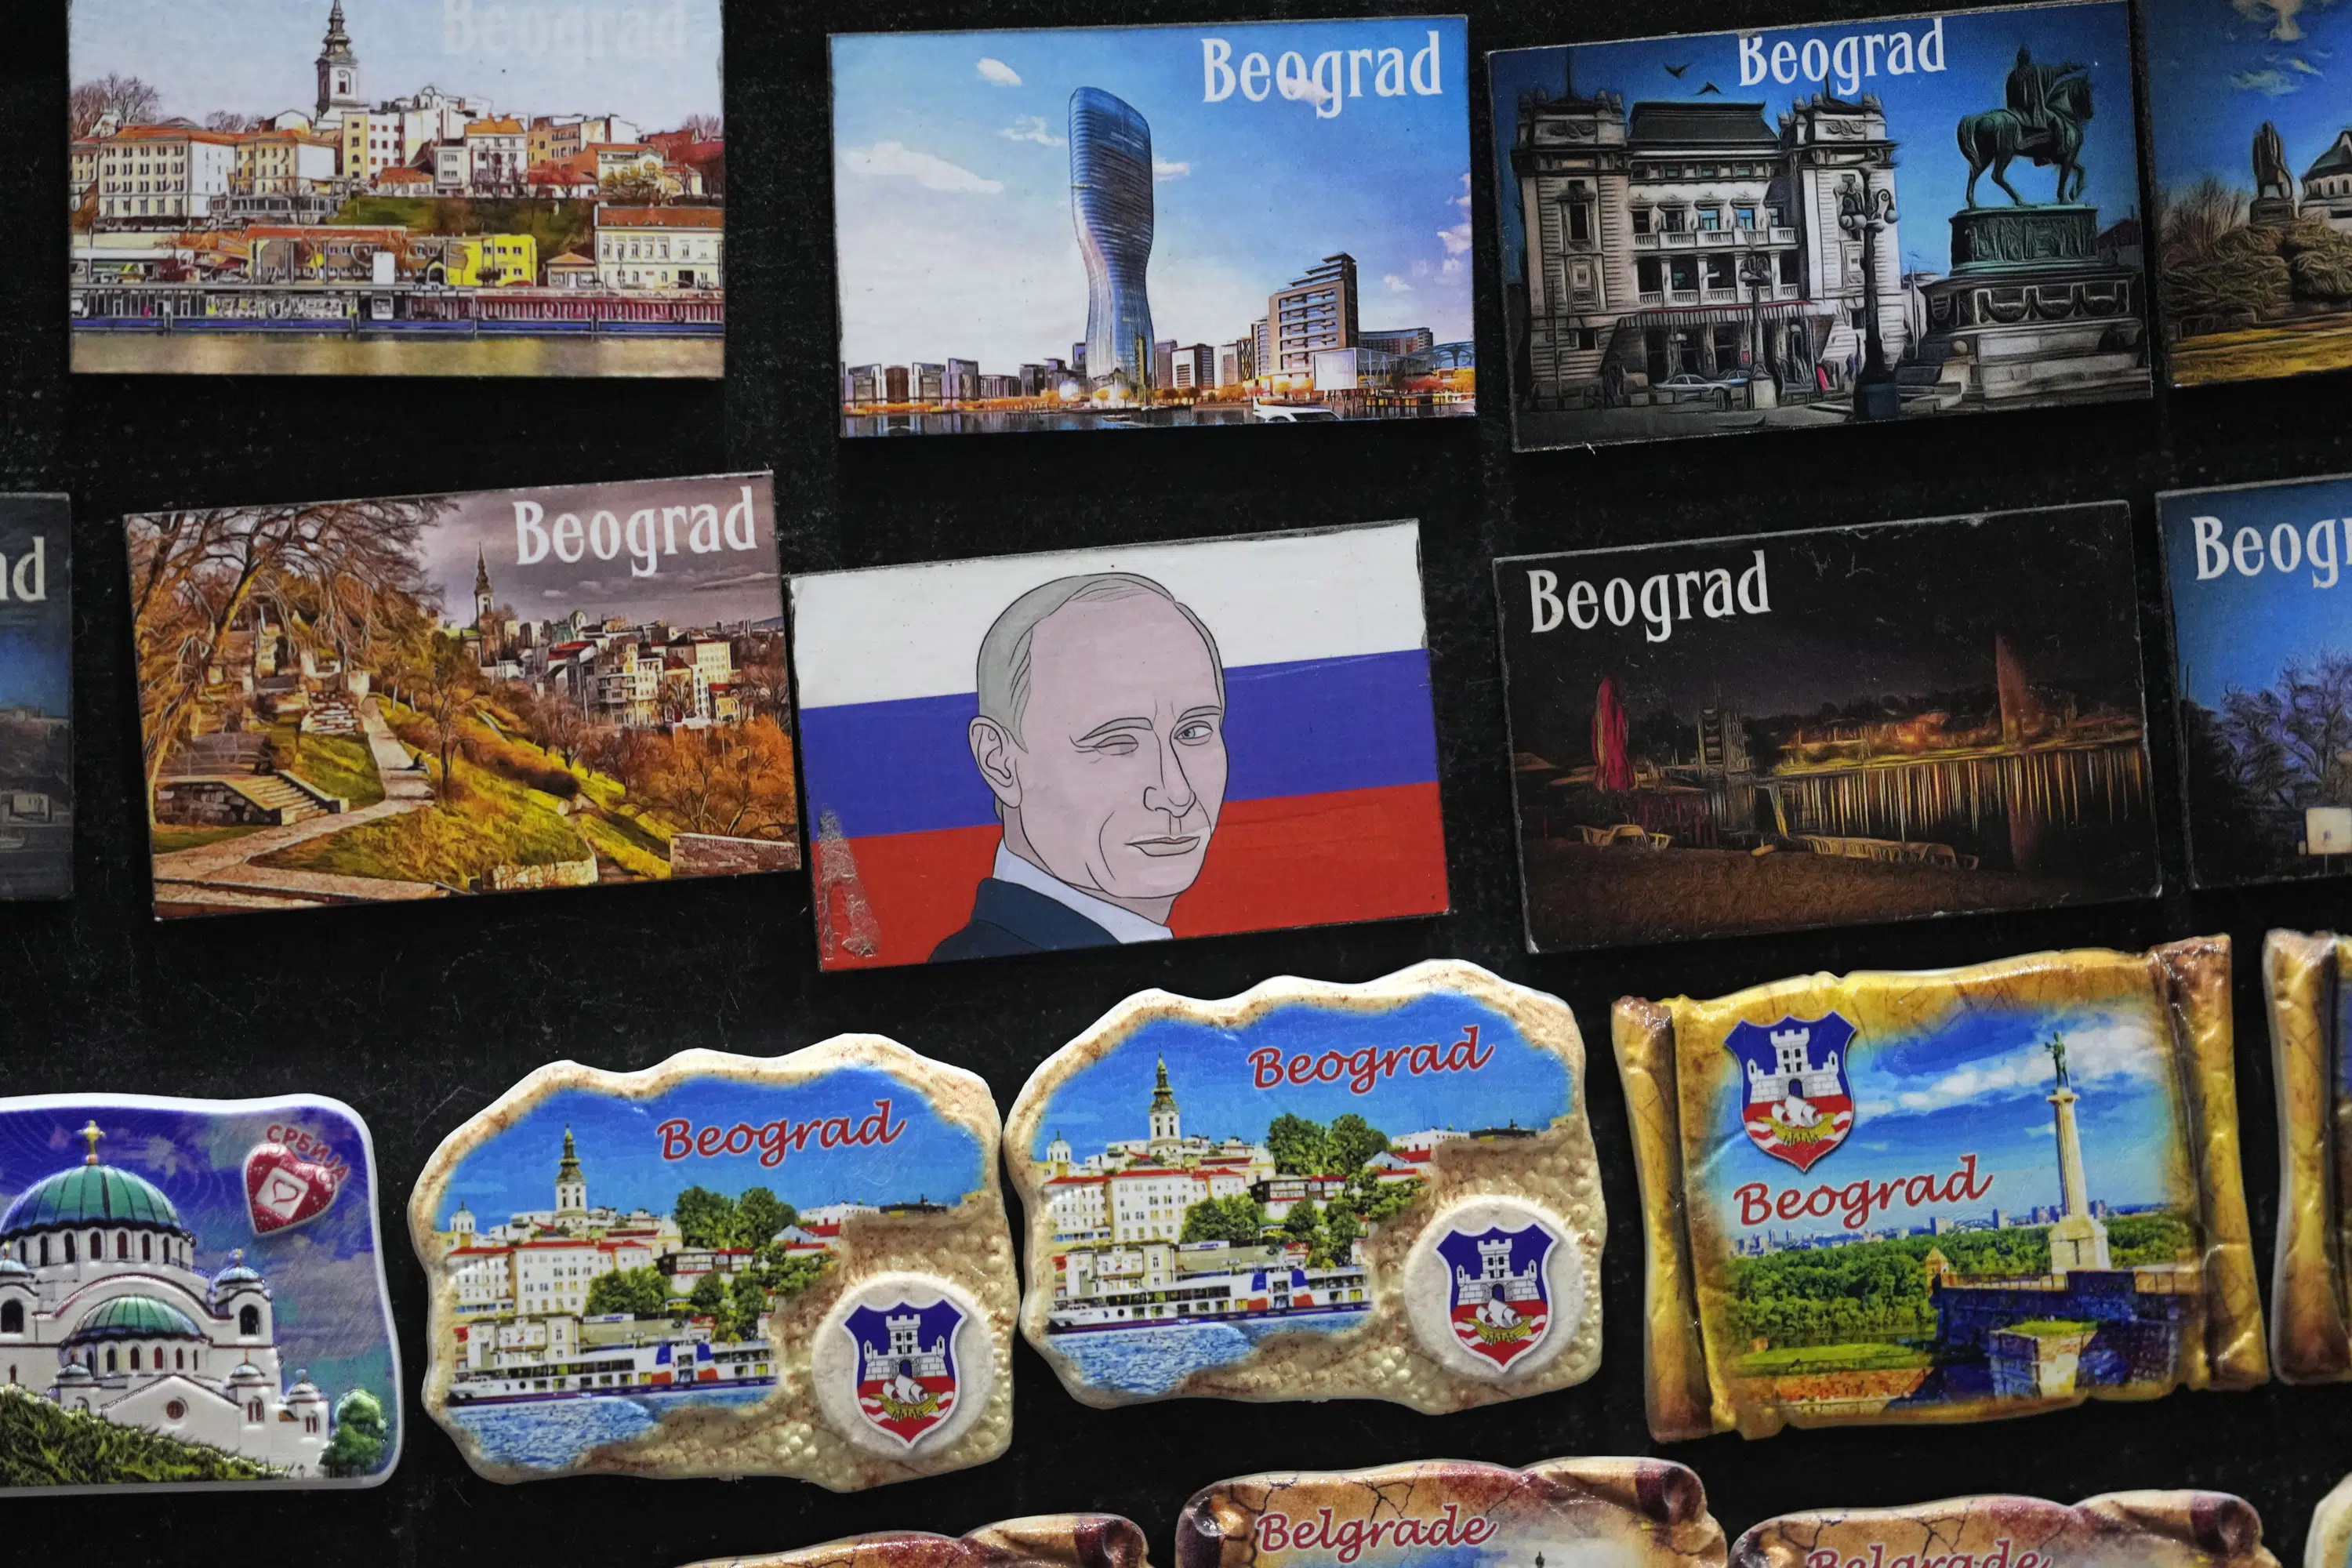 In pro-Putin Serbia, liberal-minded Russians seek a home